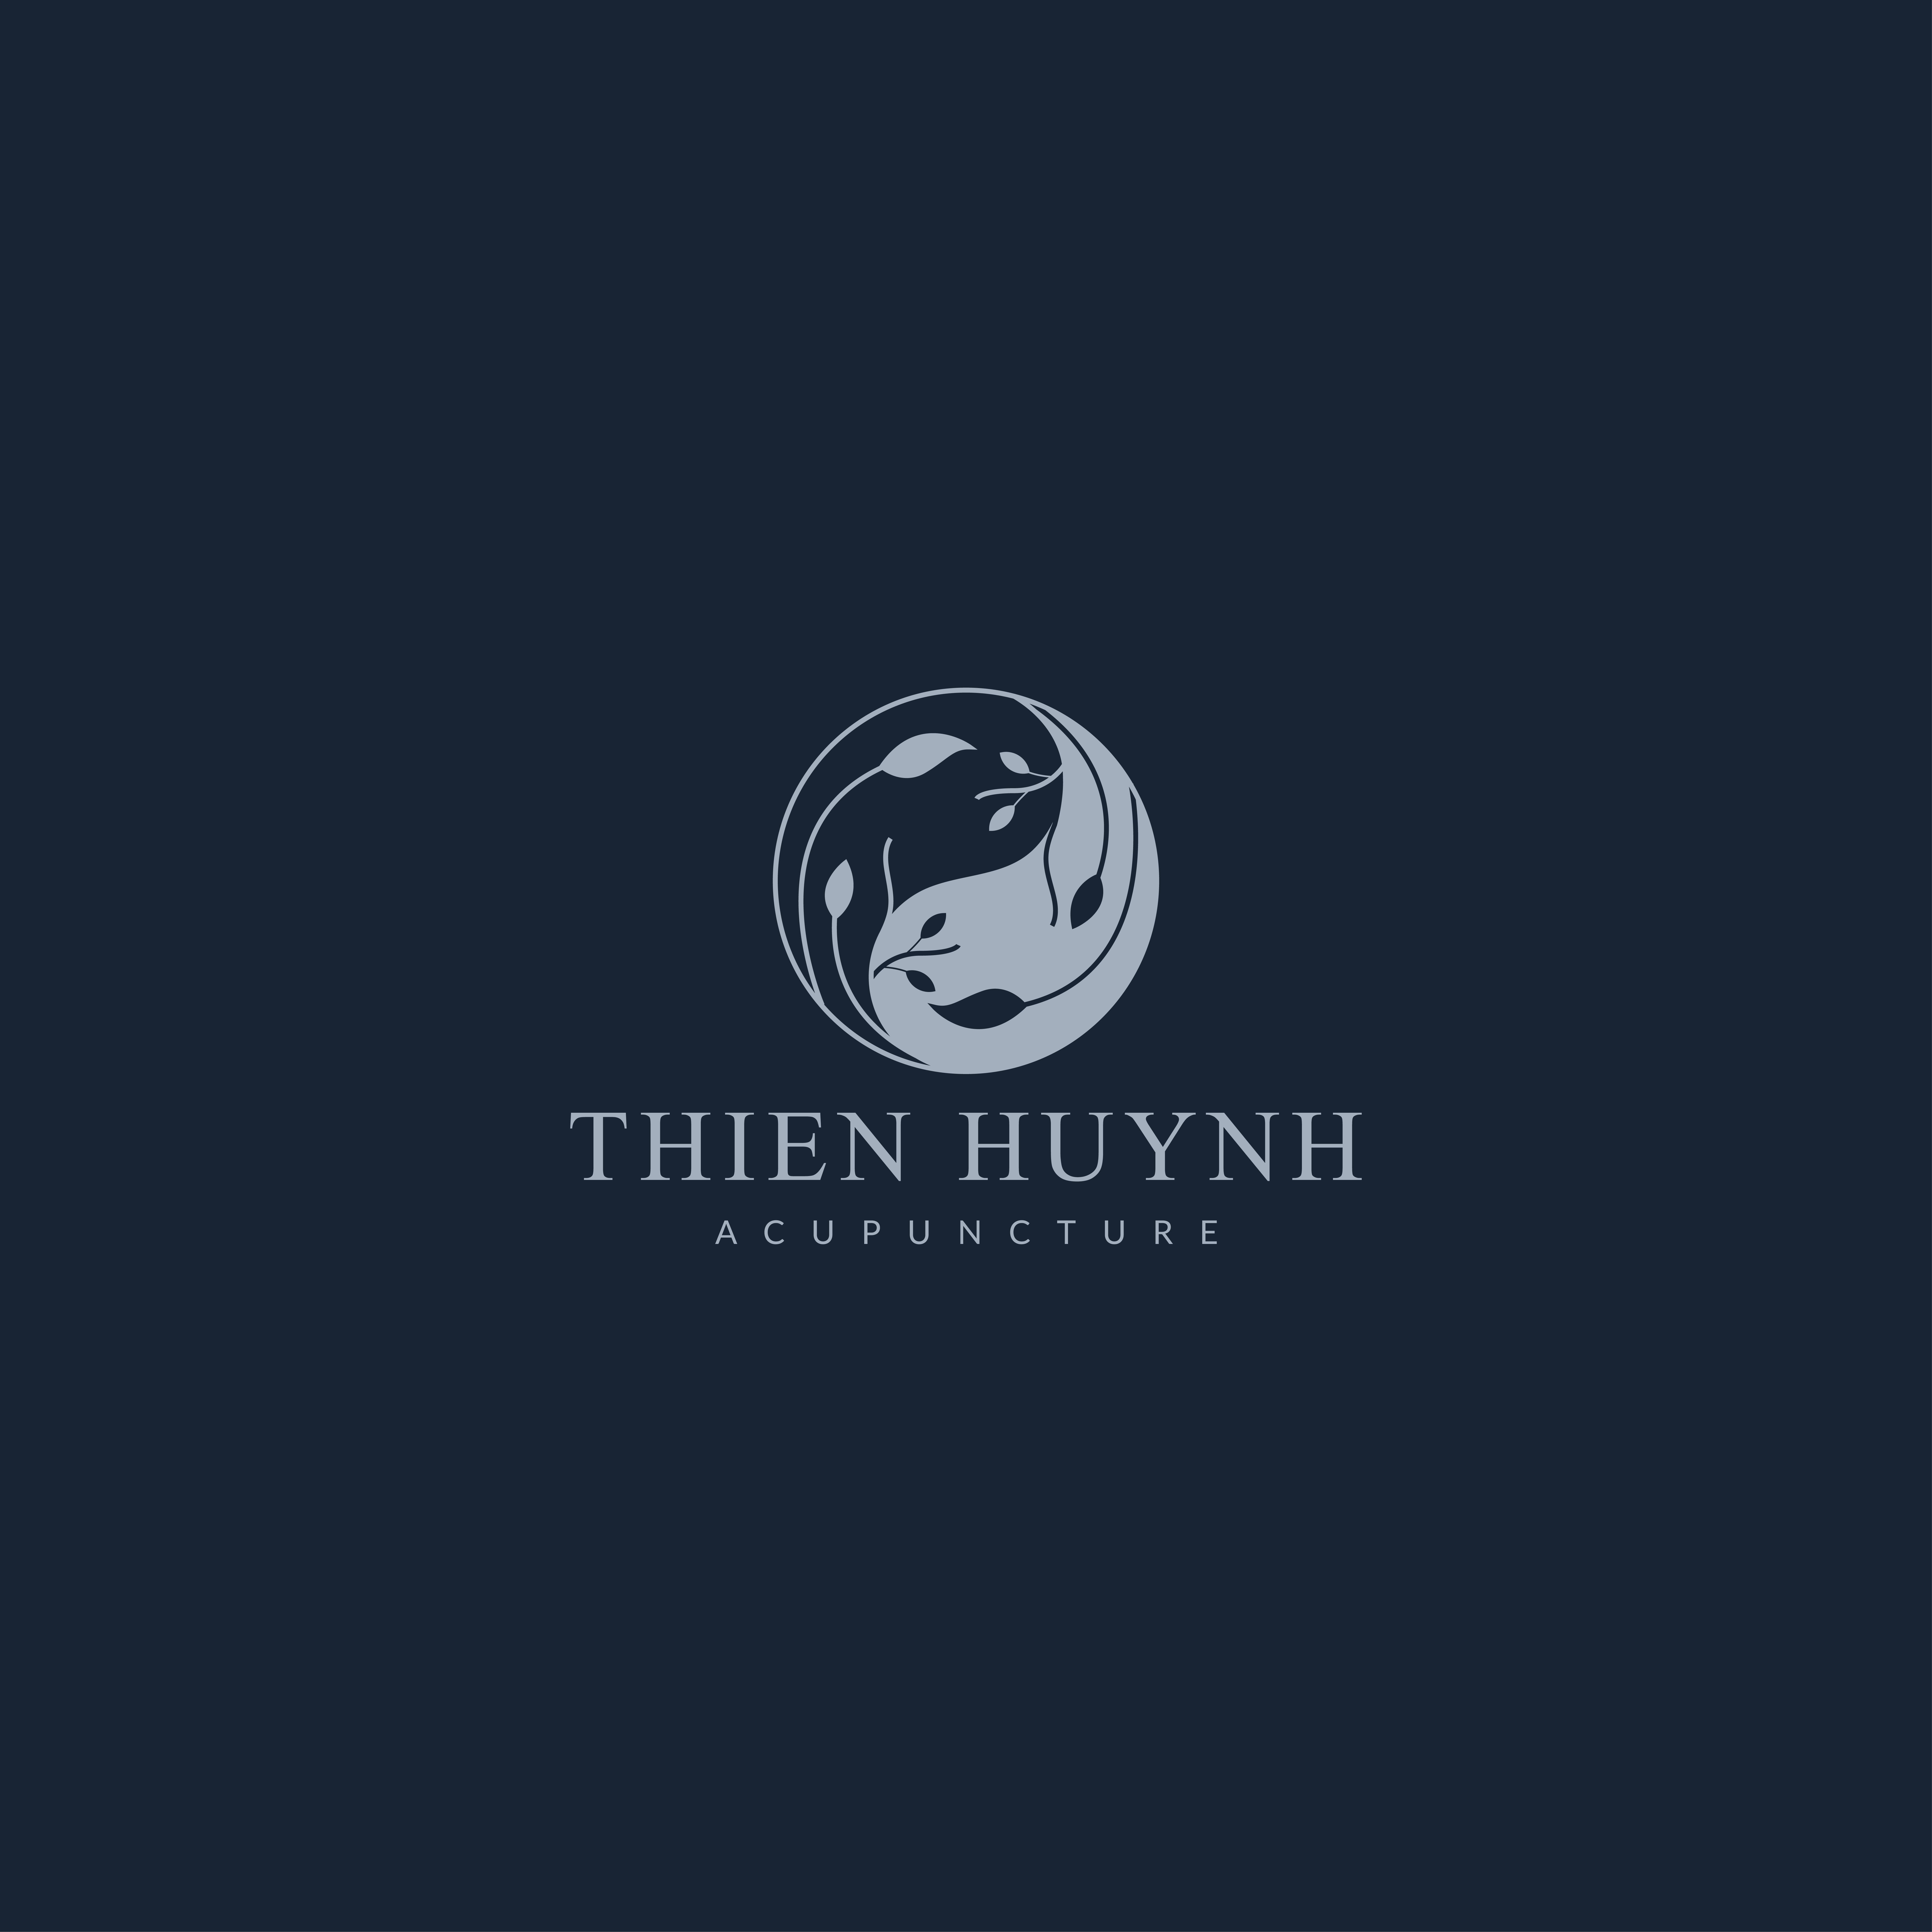 Thien Huynh Acupuncture Logo